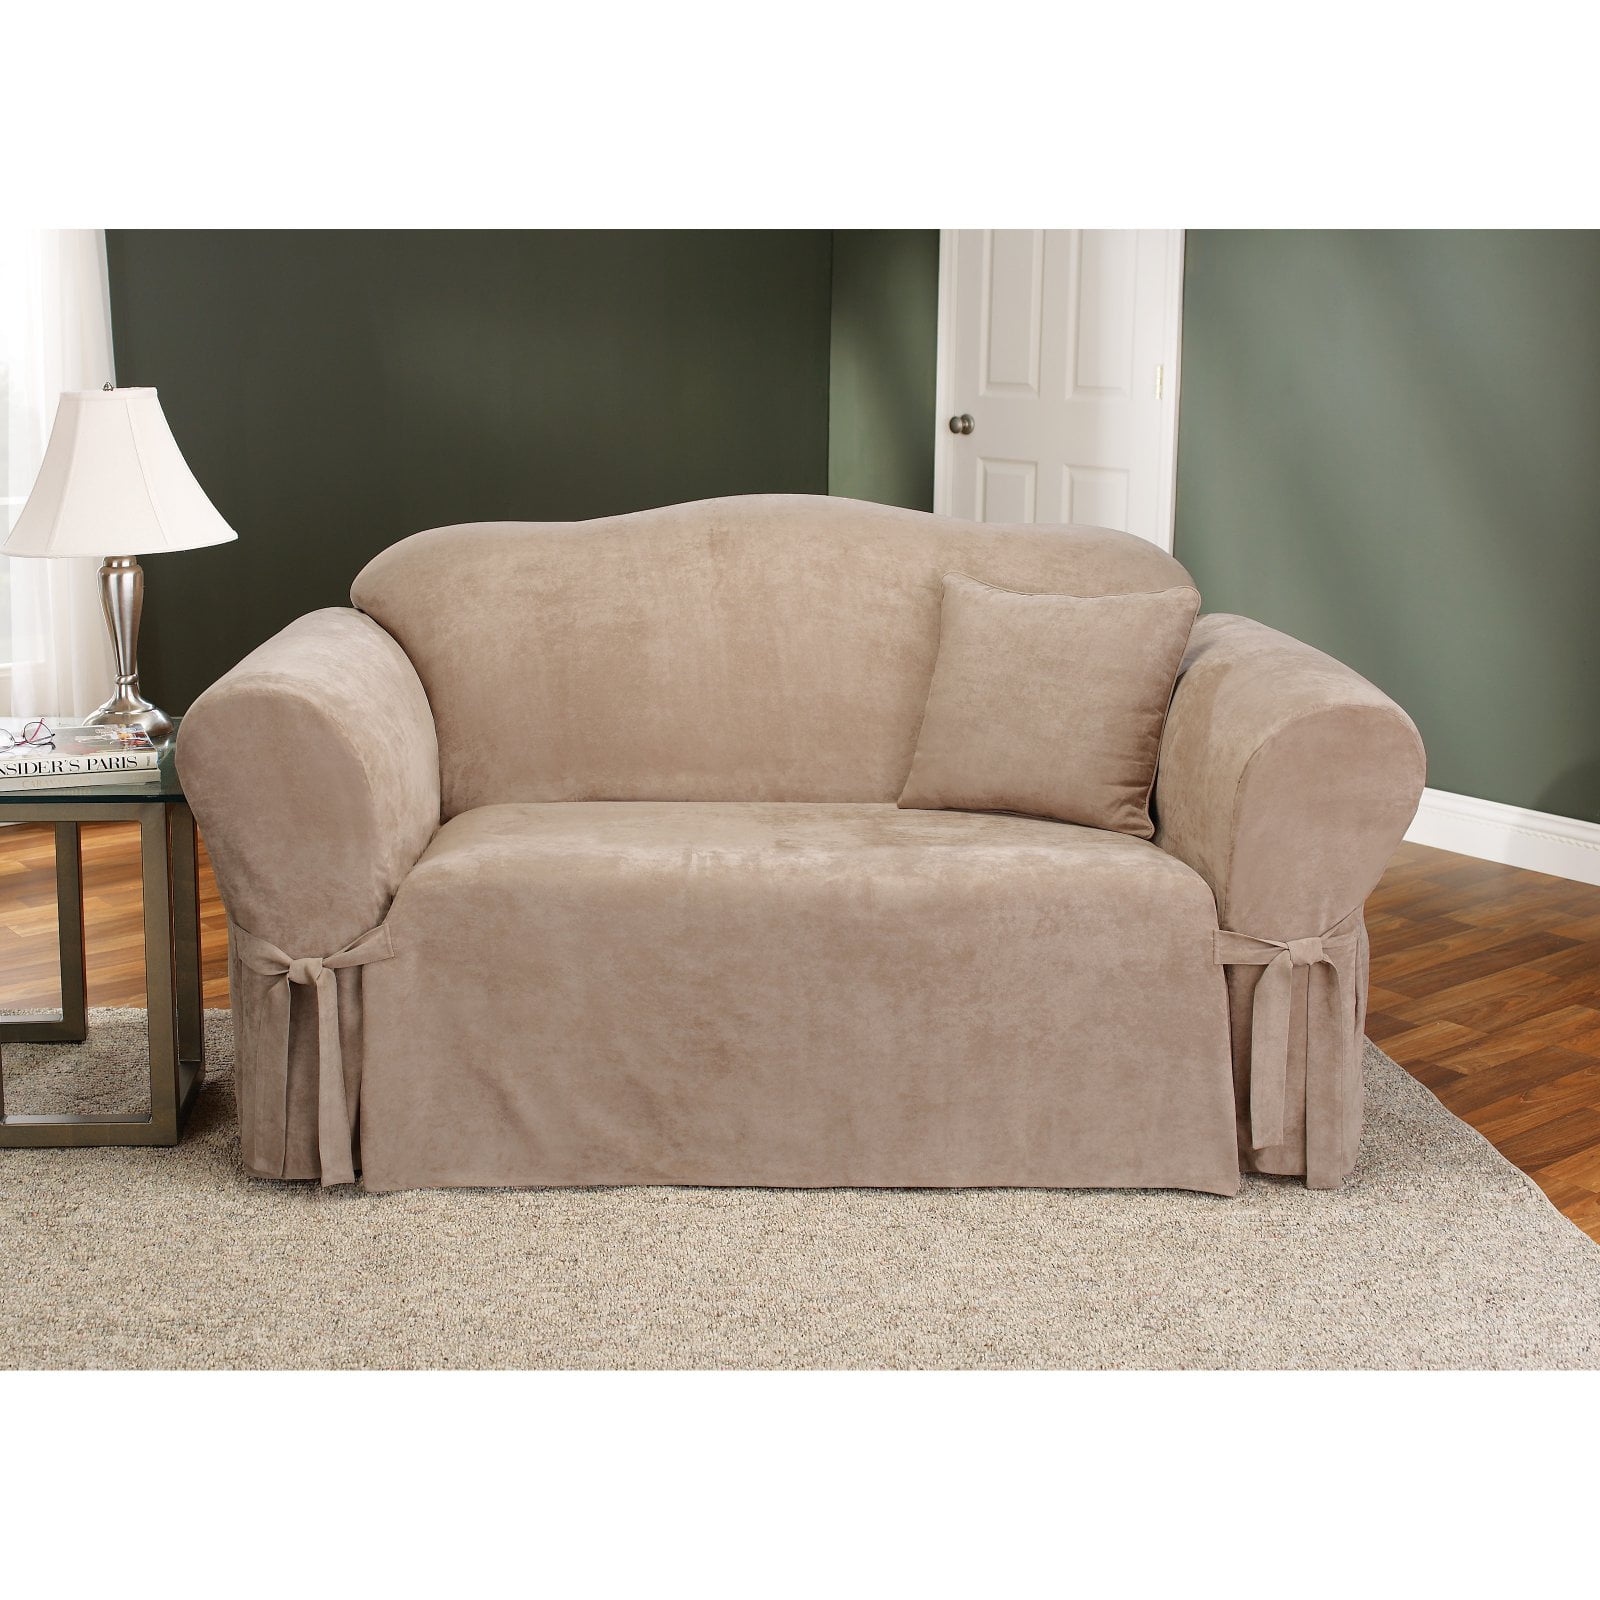 SOFA AND LOVESEAT SET Slipcover Sure Fit Stretch Pique One Piece Brown Box 